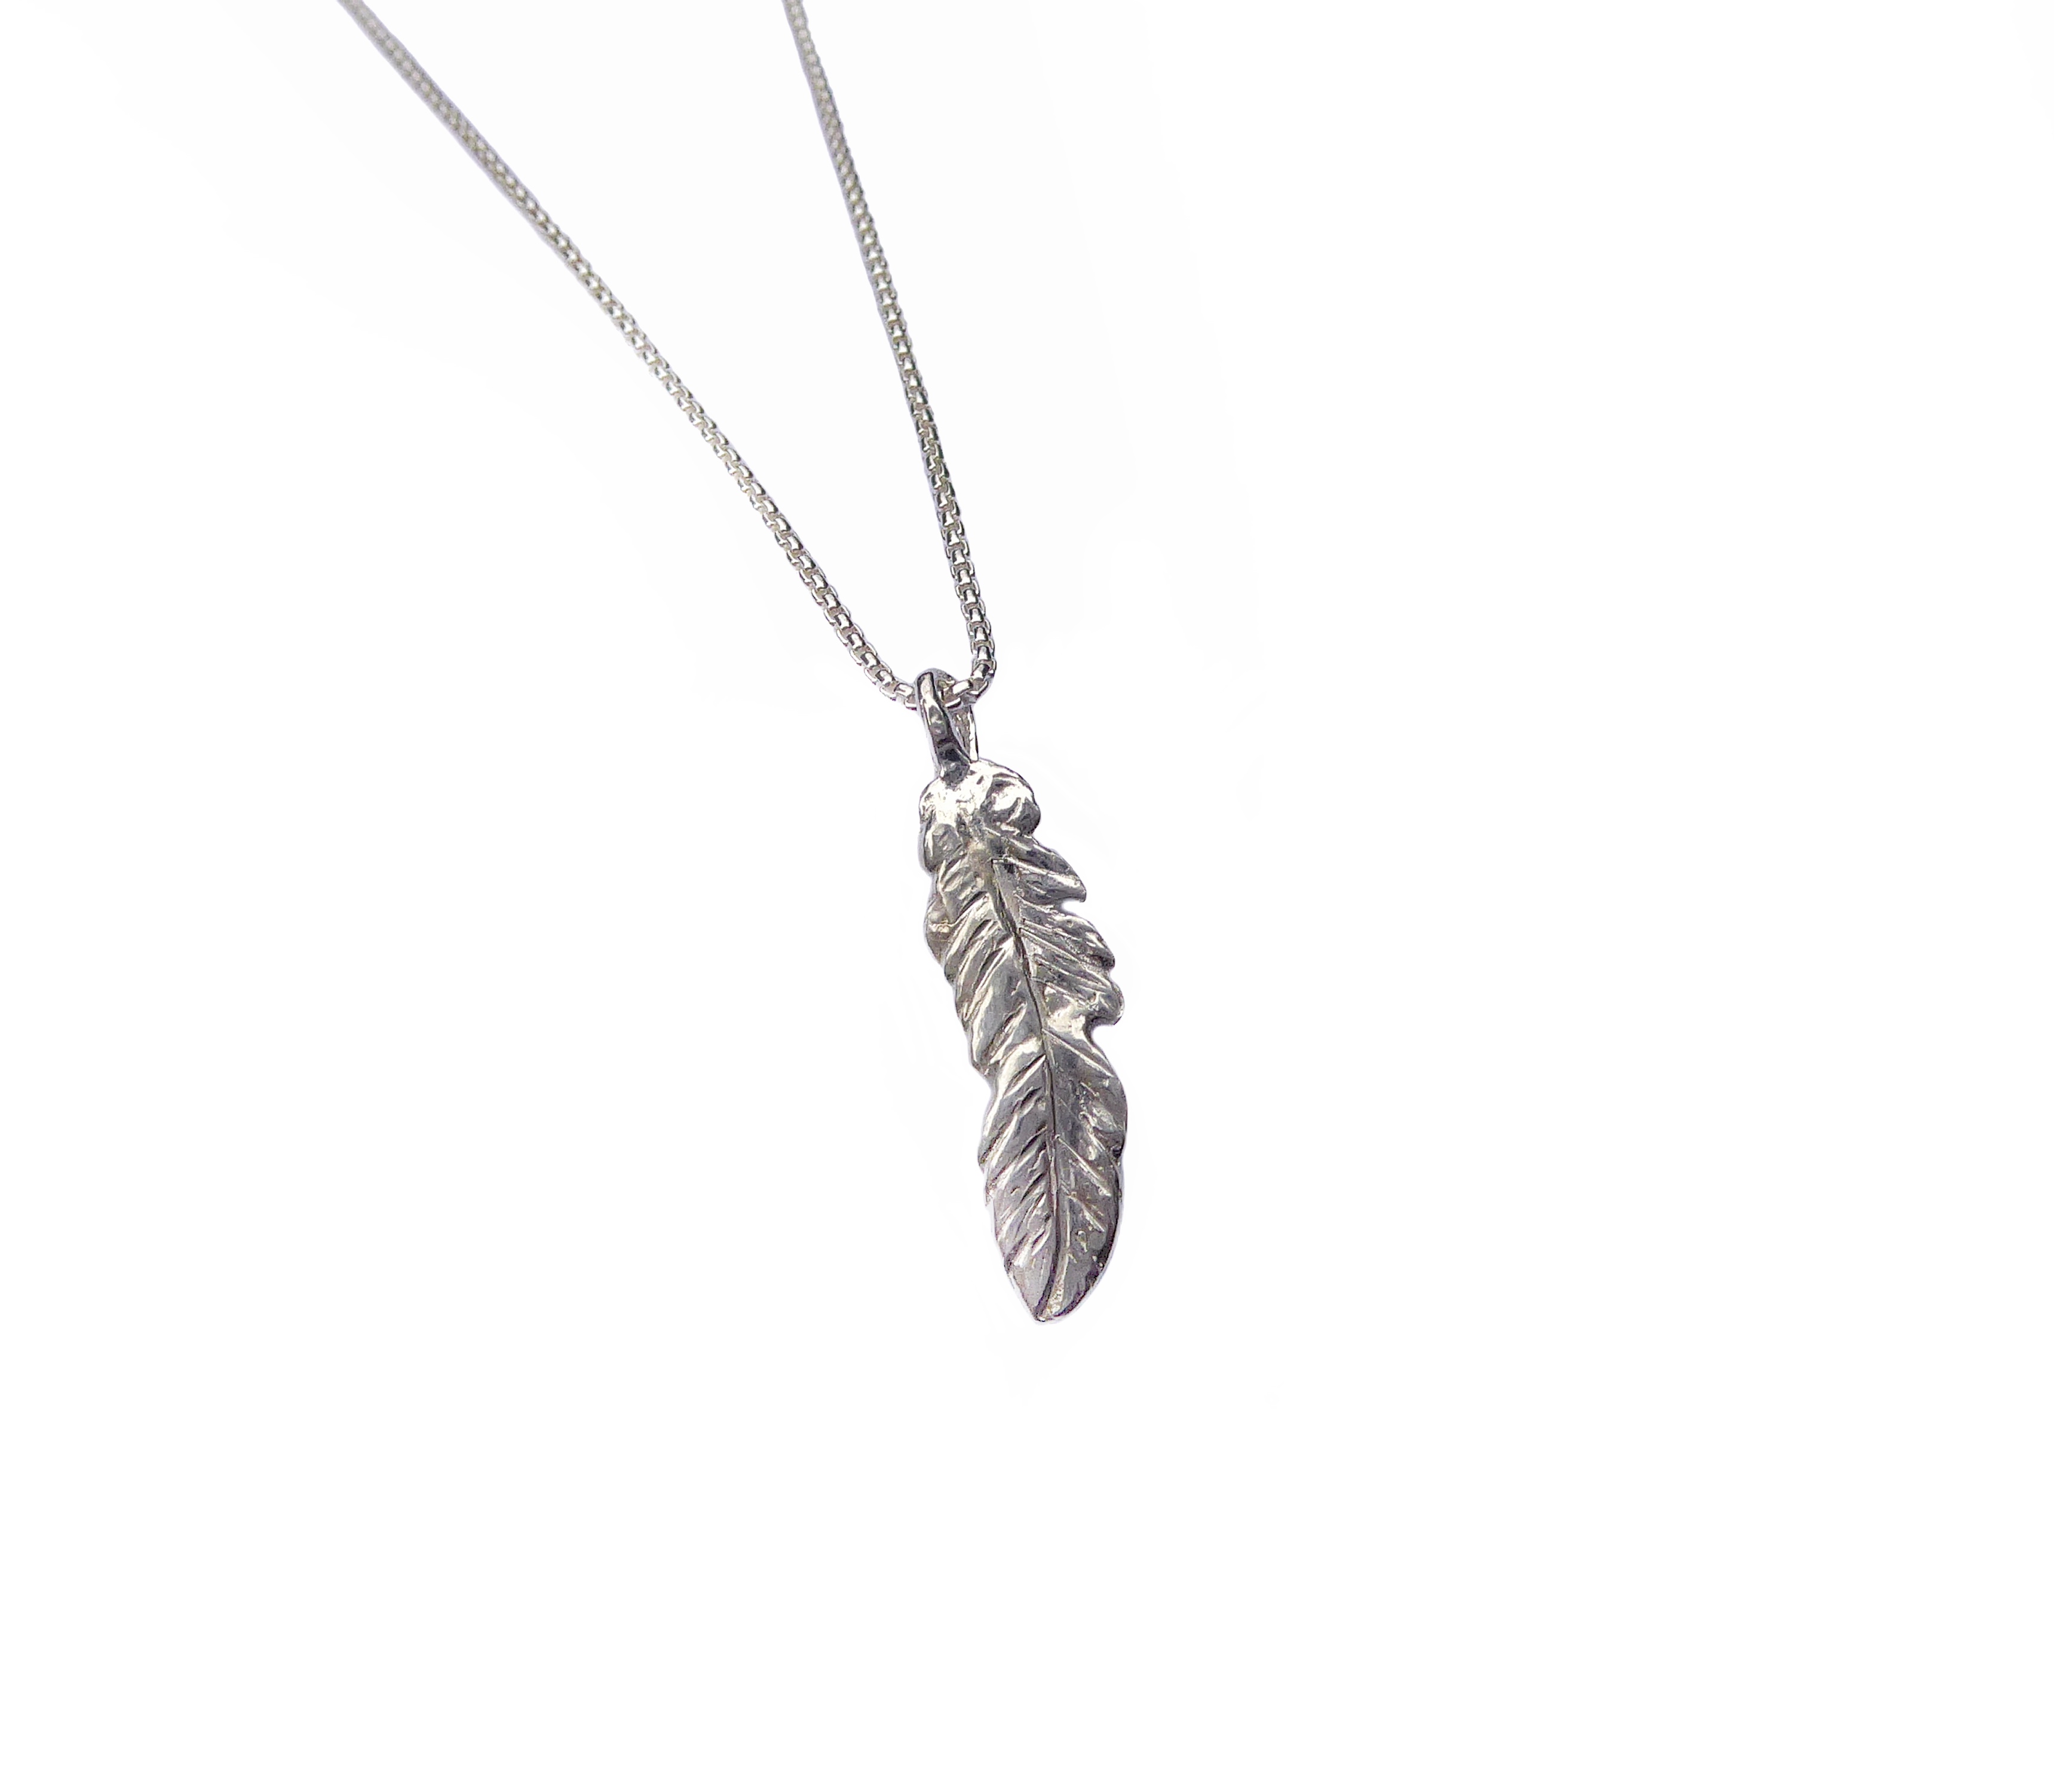 Handmade sterling silver feather pendant - Carol Clift Jewellery